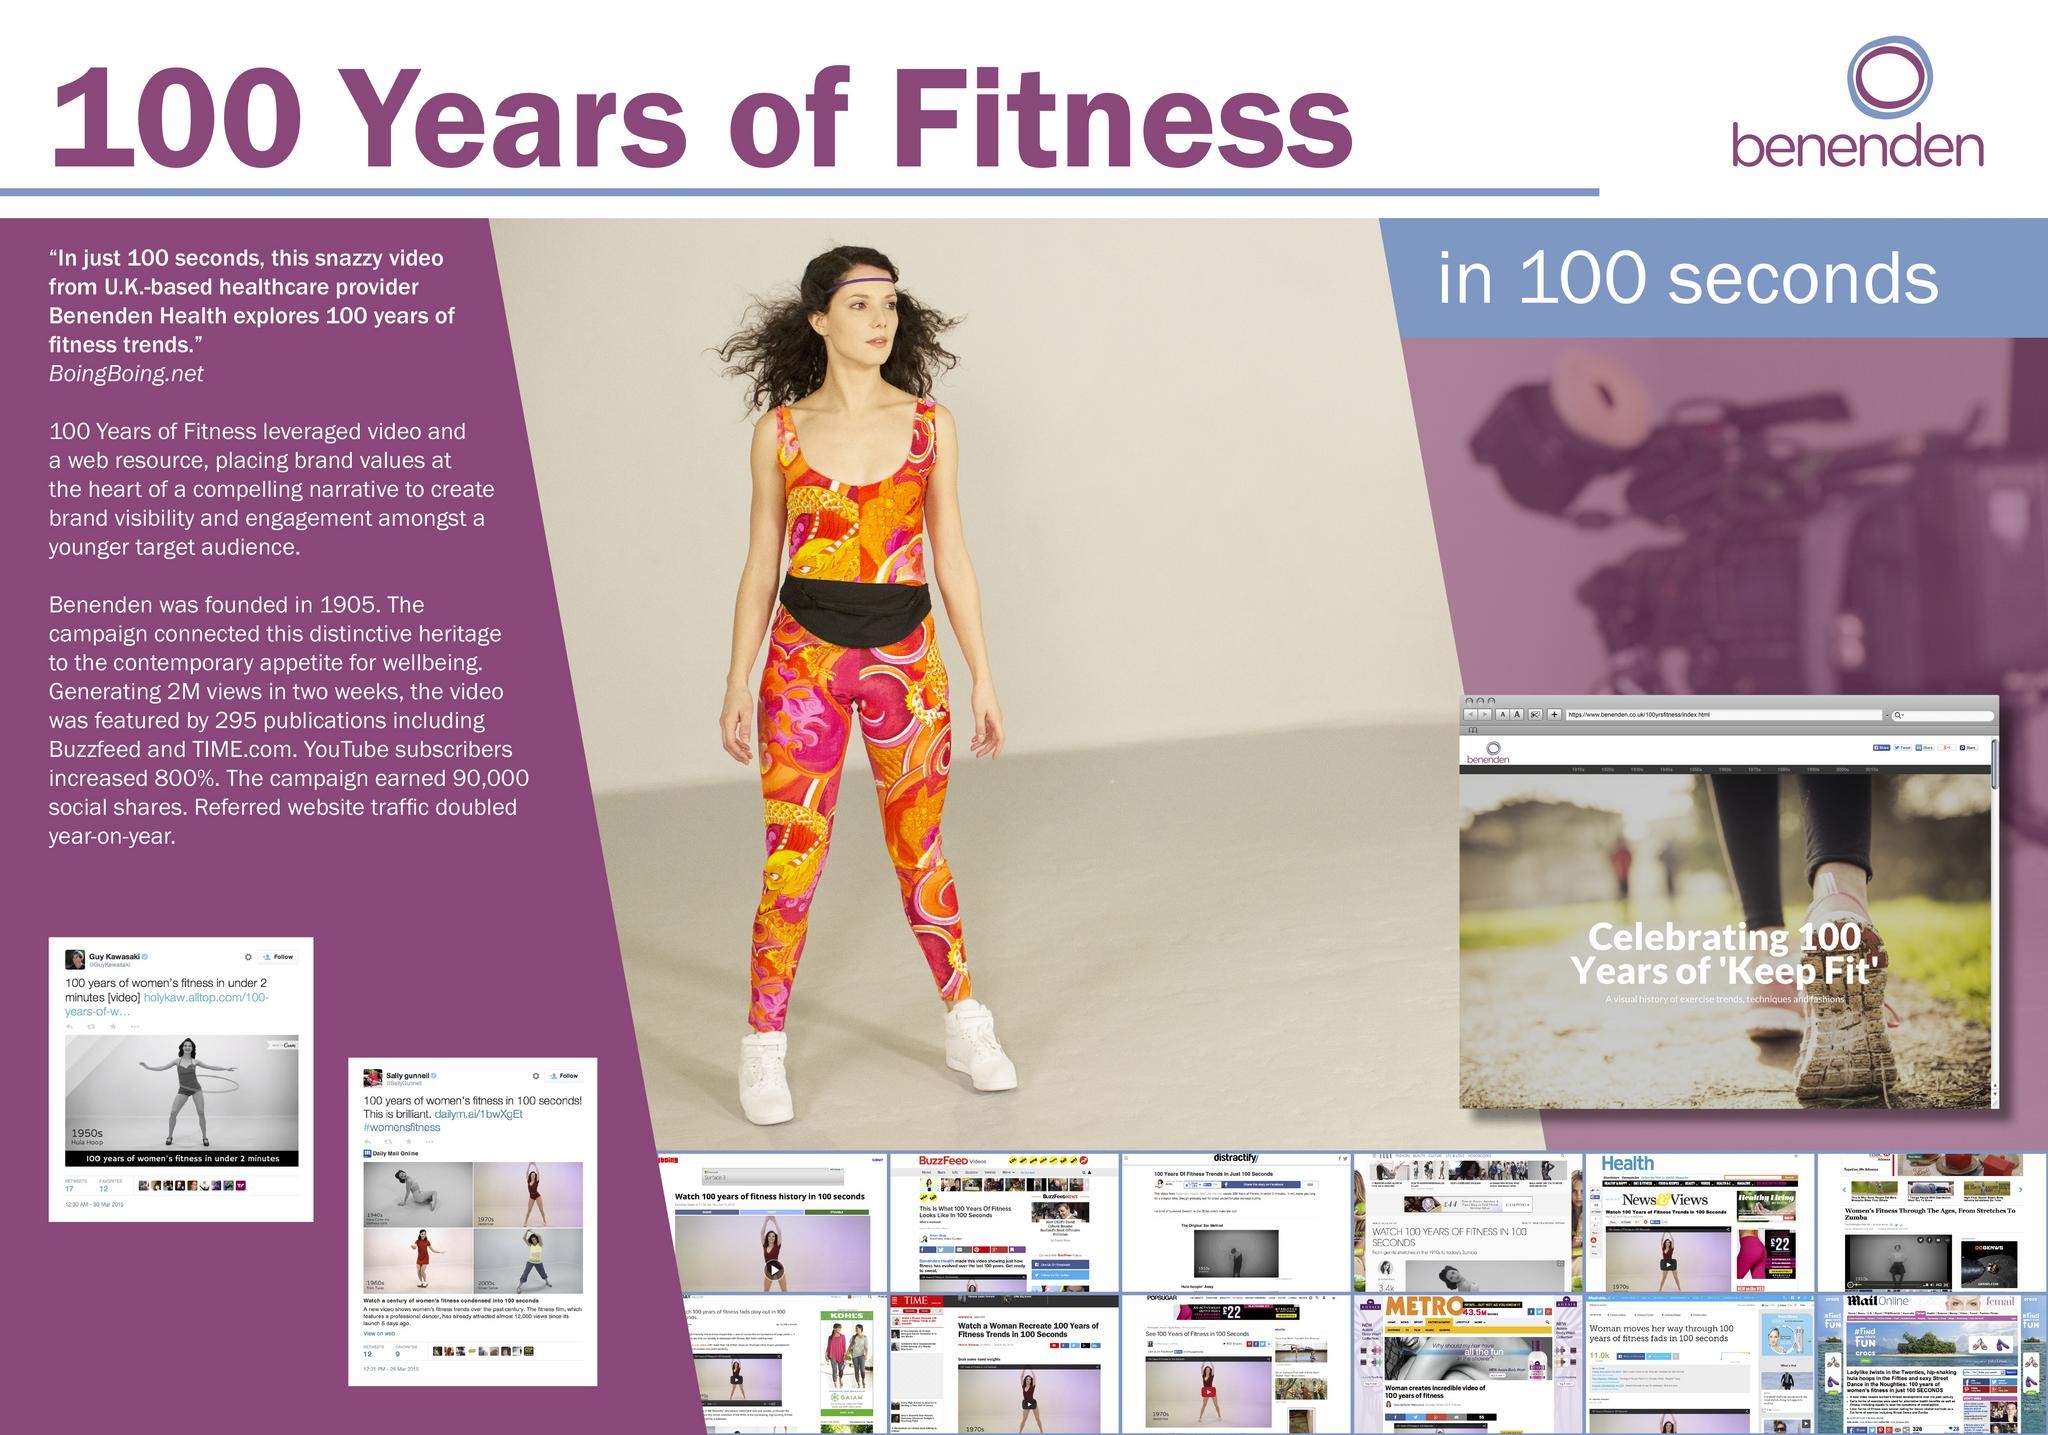 100 YEARS OF FITNESS